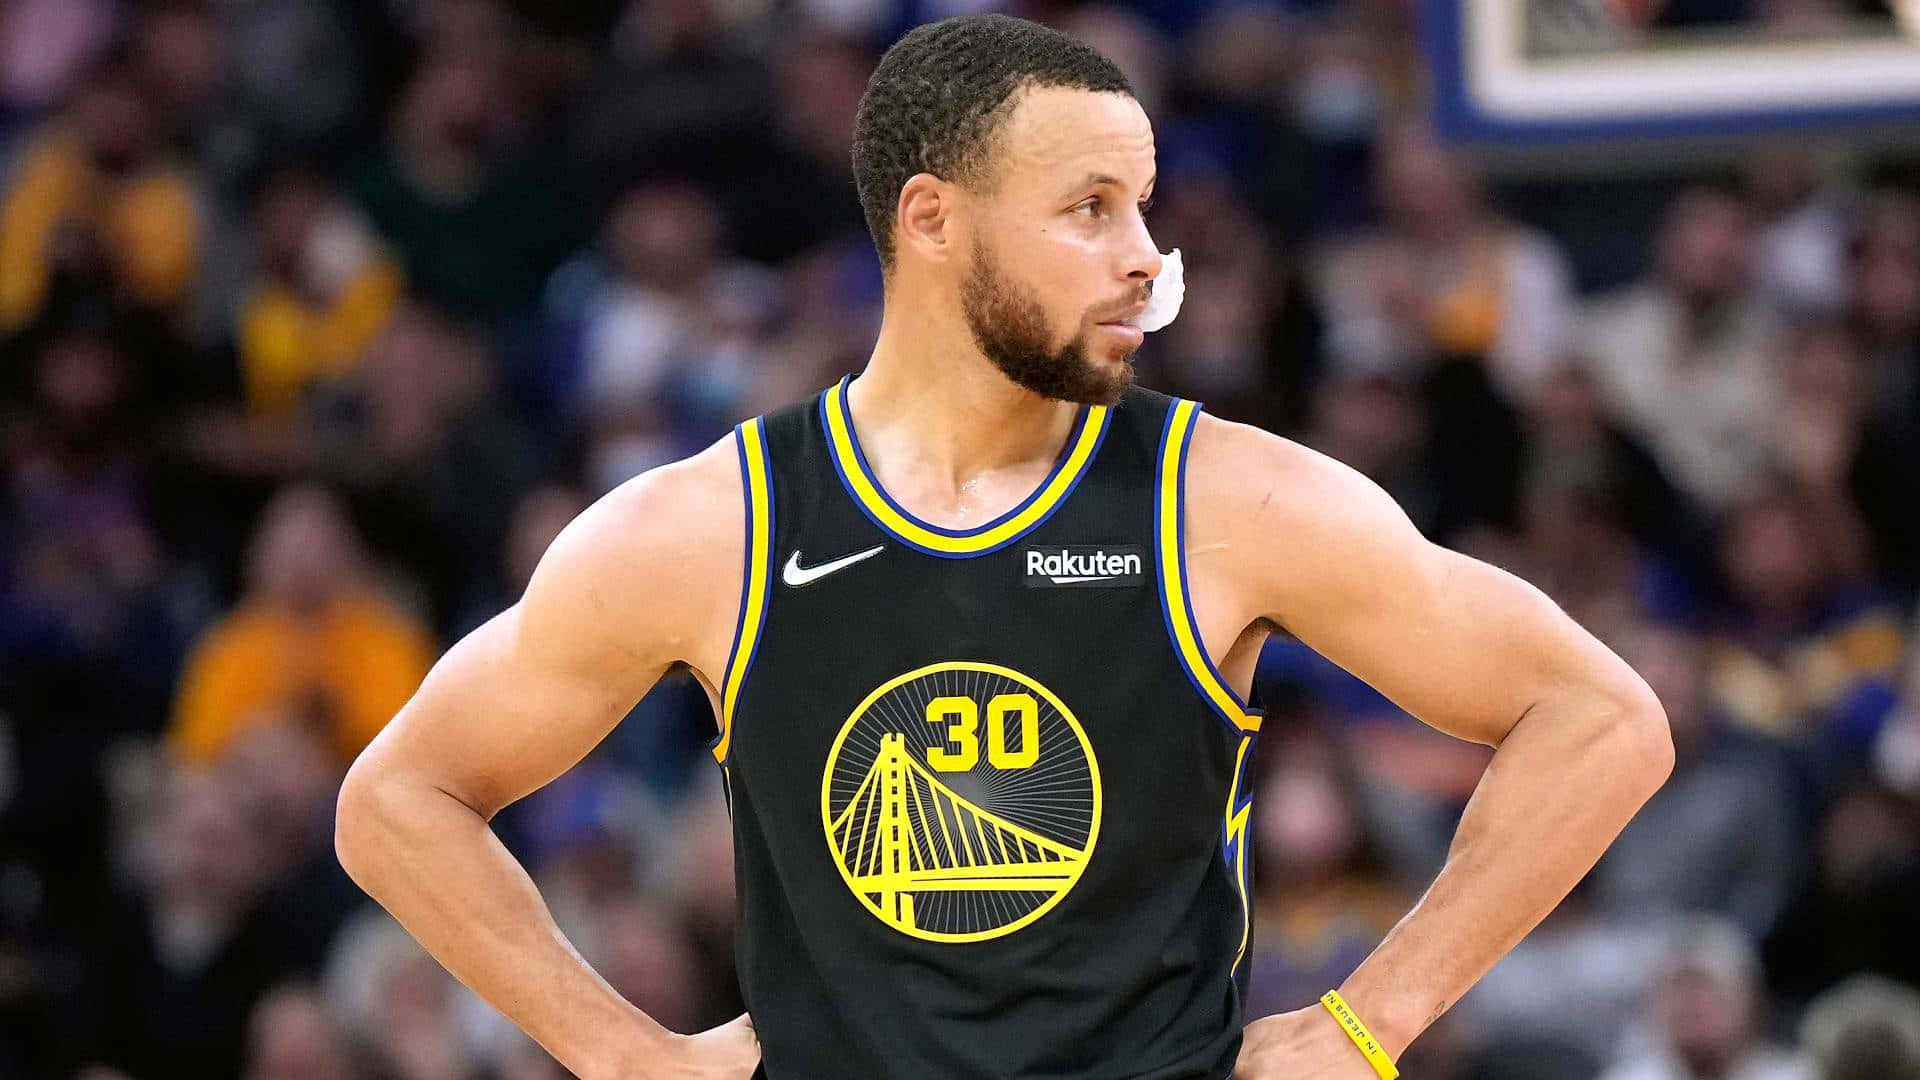 Stephen Curry is a renowned NBA player making history